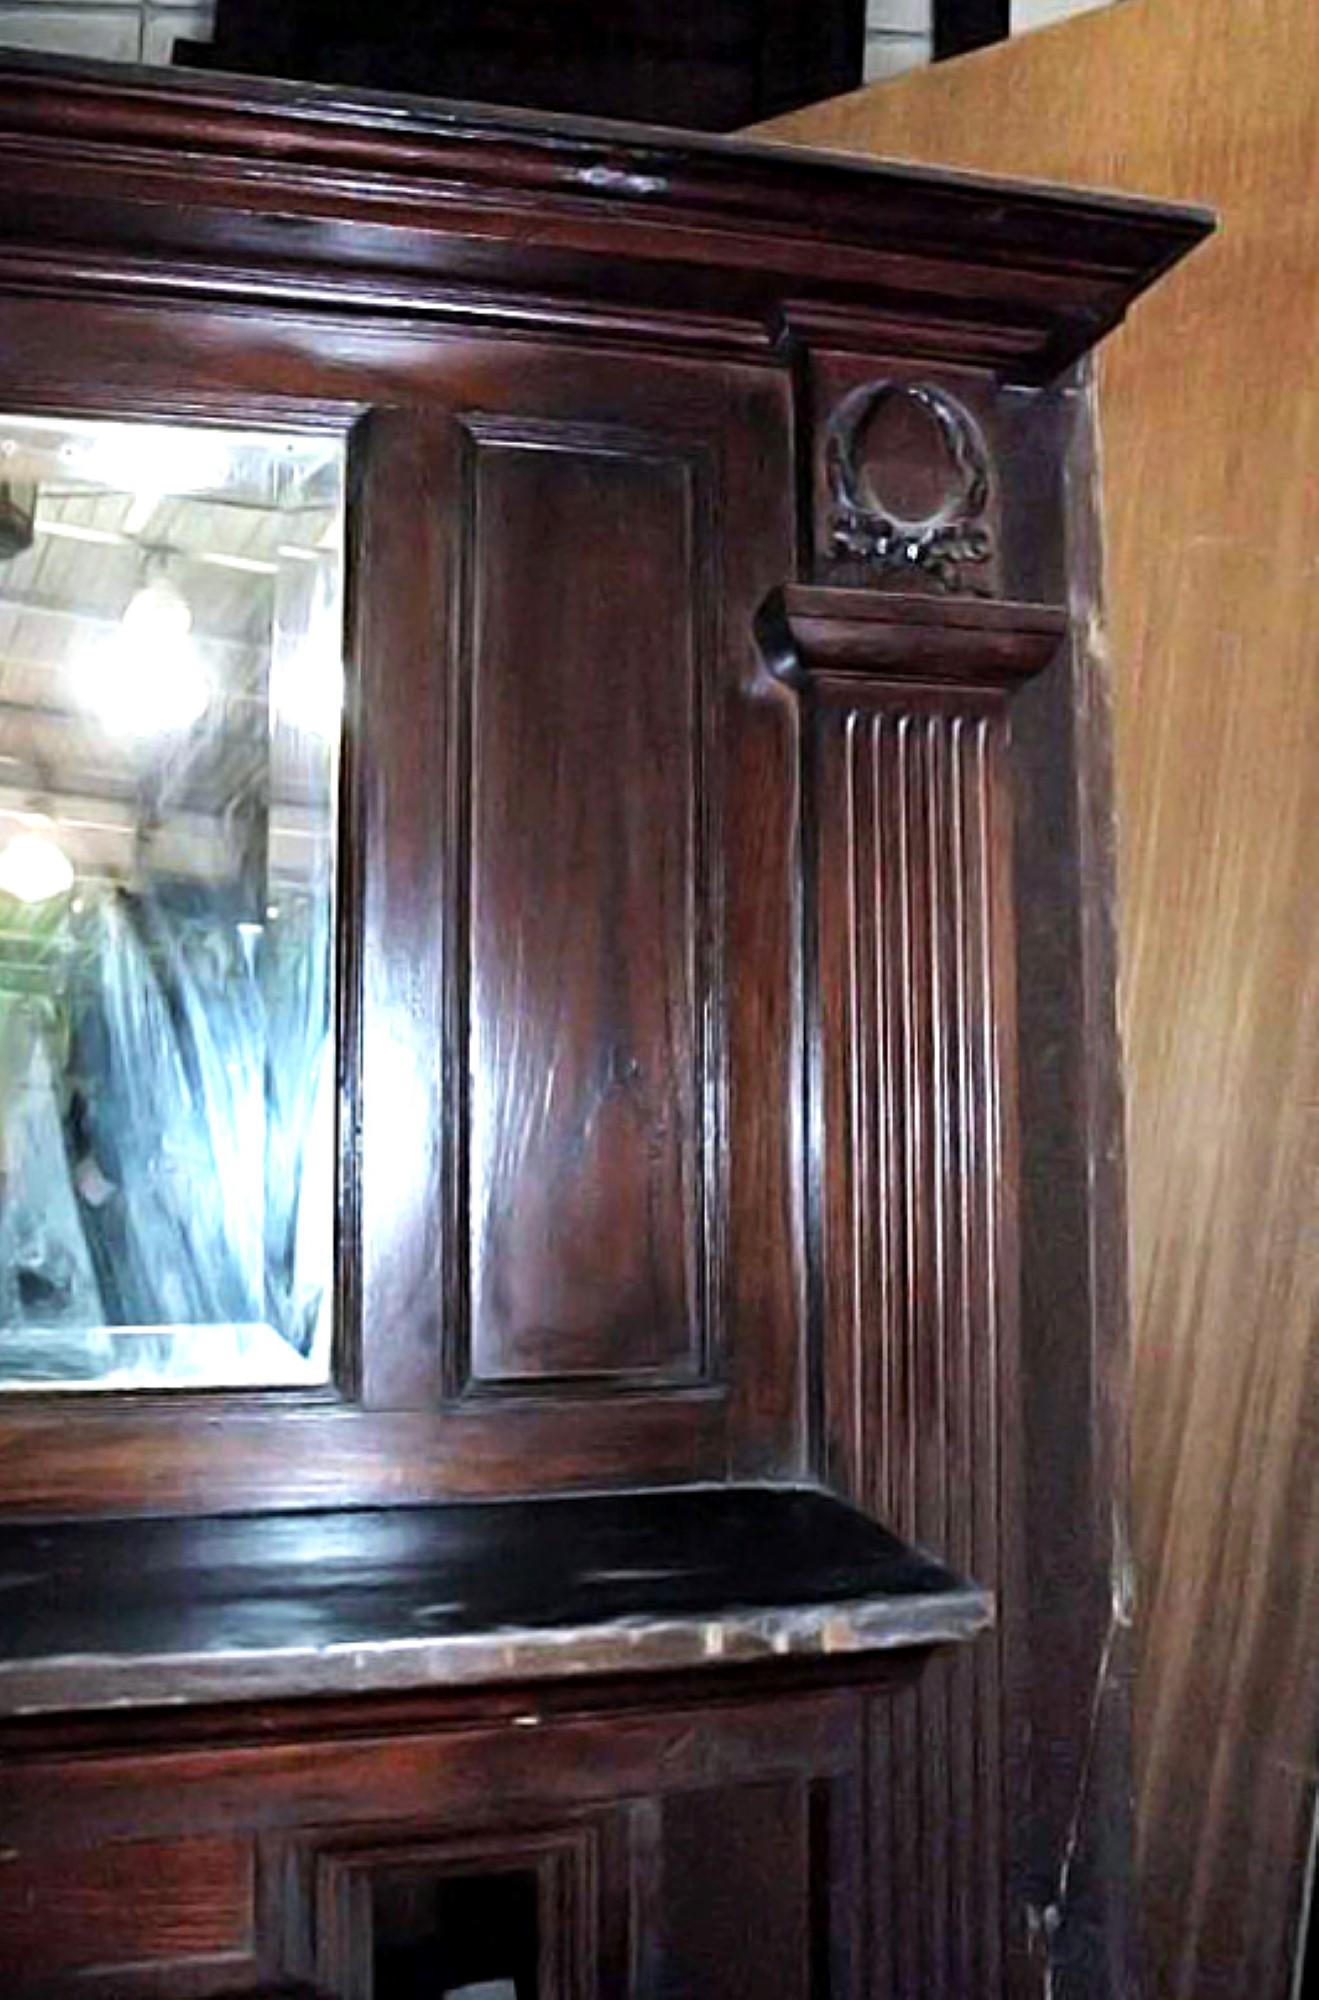 Victorian wood mantel with a hand carved wreath motif in center, circa late 1800s. It has the dark mahogany original finish and features the original beveled over mantel mirror. Wear is consistent with age. This can be seen at our 400 Gilligan St